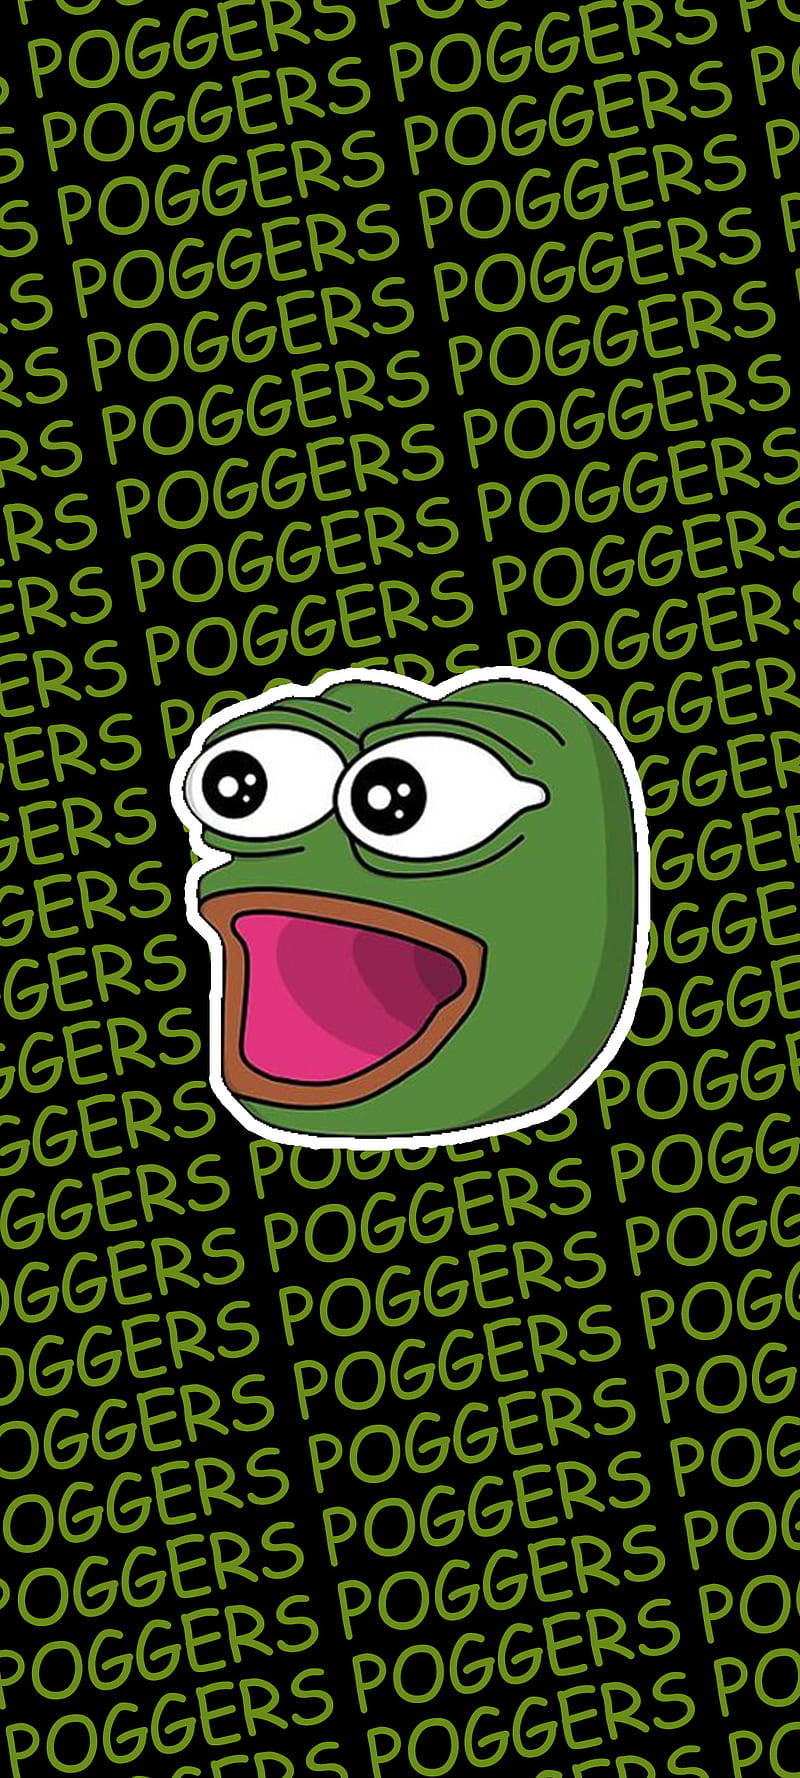 Pepe The Frog Poggers Background